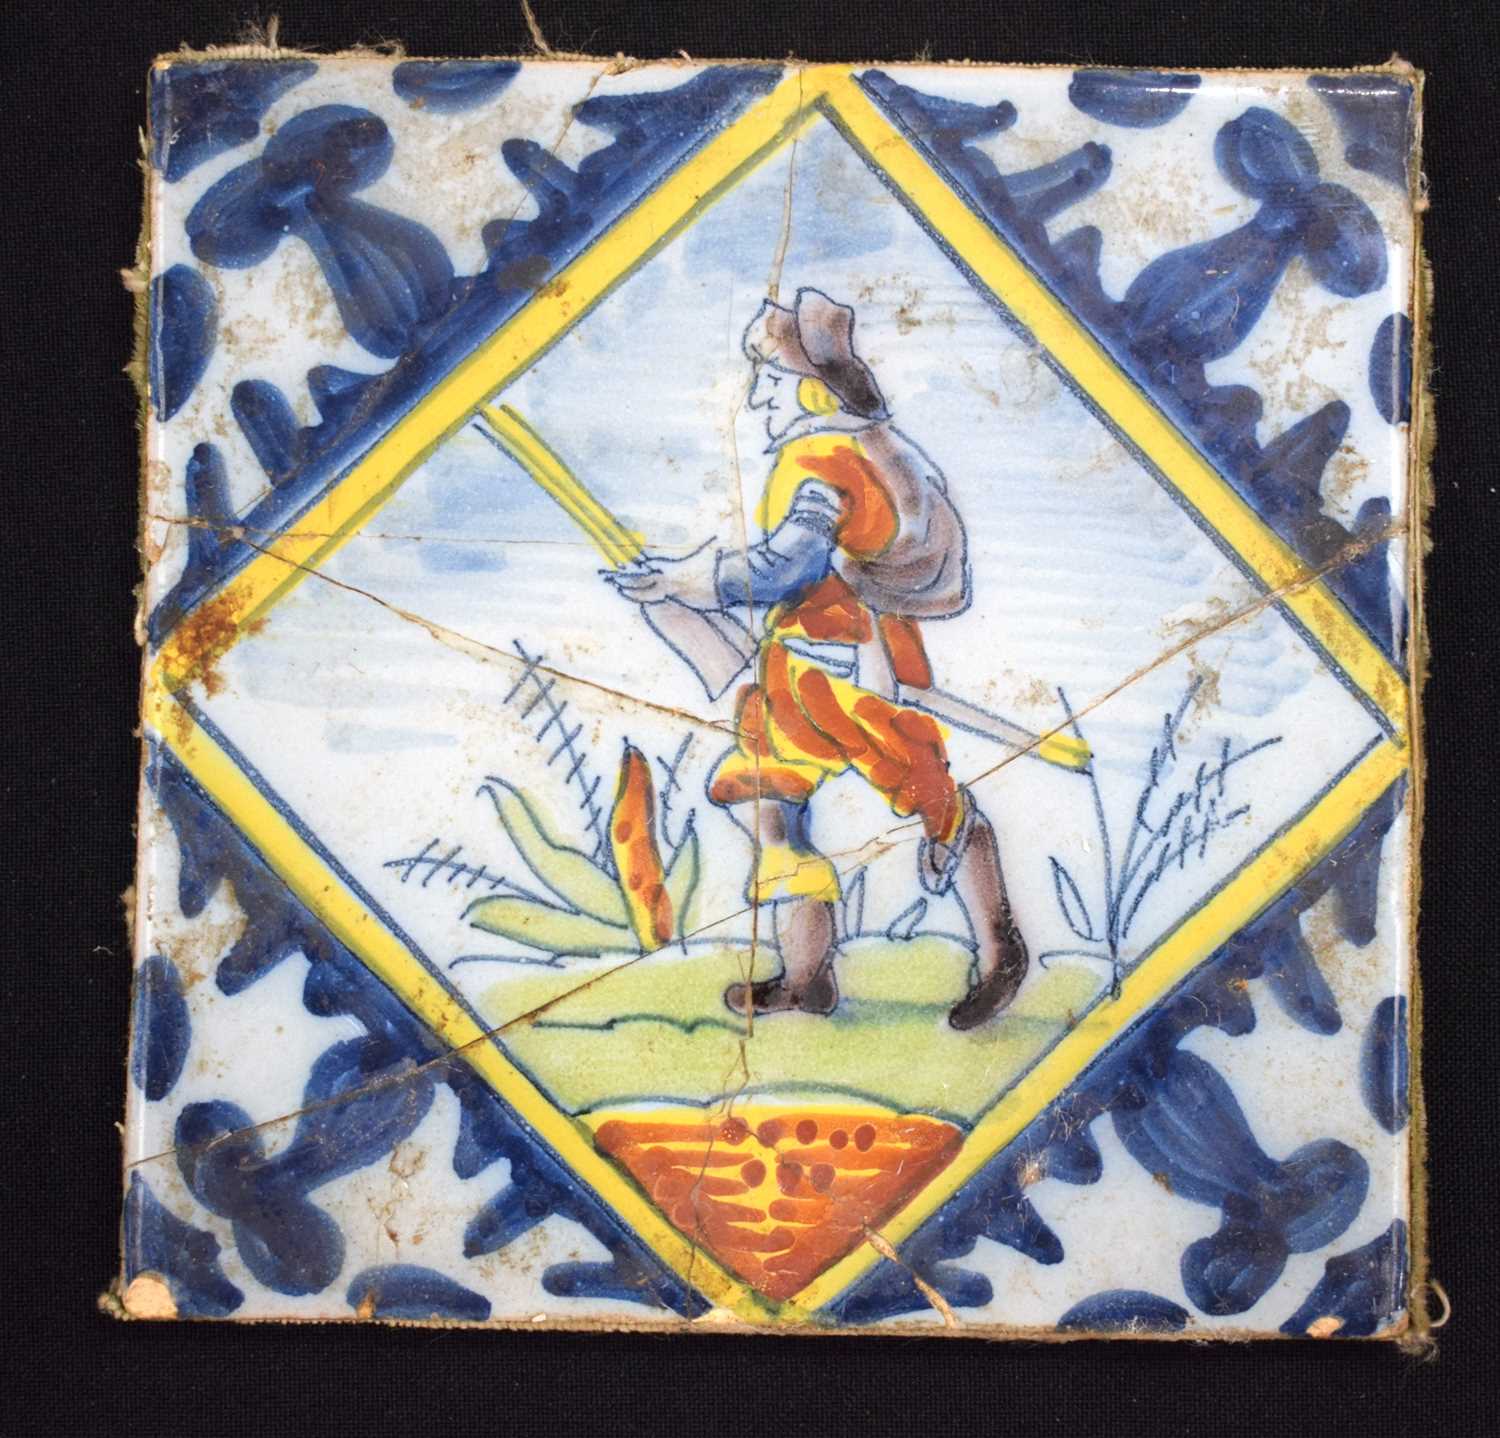 SIX DELFT POLCYRHOMED TILES. 12.5 cm square. (6) - Image 20 of 20